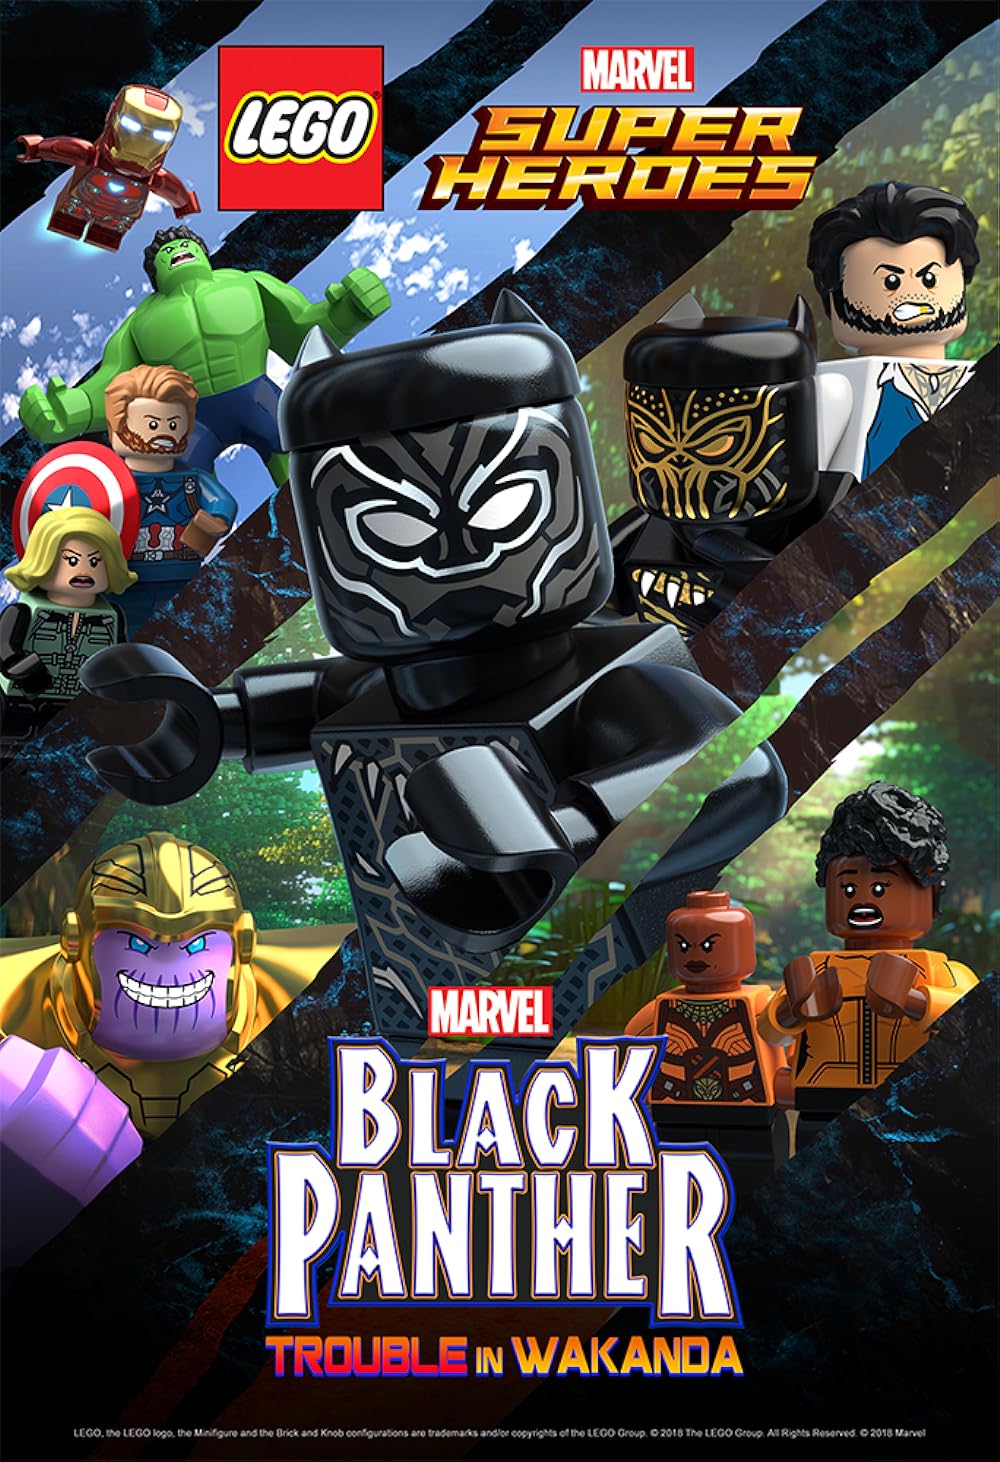 LEGO Marvel Super Heroes: Black Panther - Trouble in Wakanda (2018) 128Kbps 23.976Fps 48Khz 2.0Ch DD+ NF E-AC3 Turkish Audio TAC